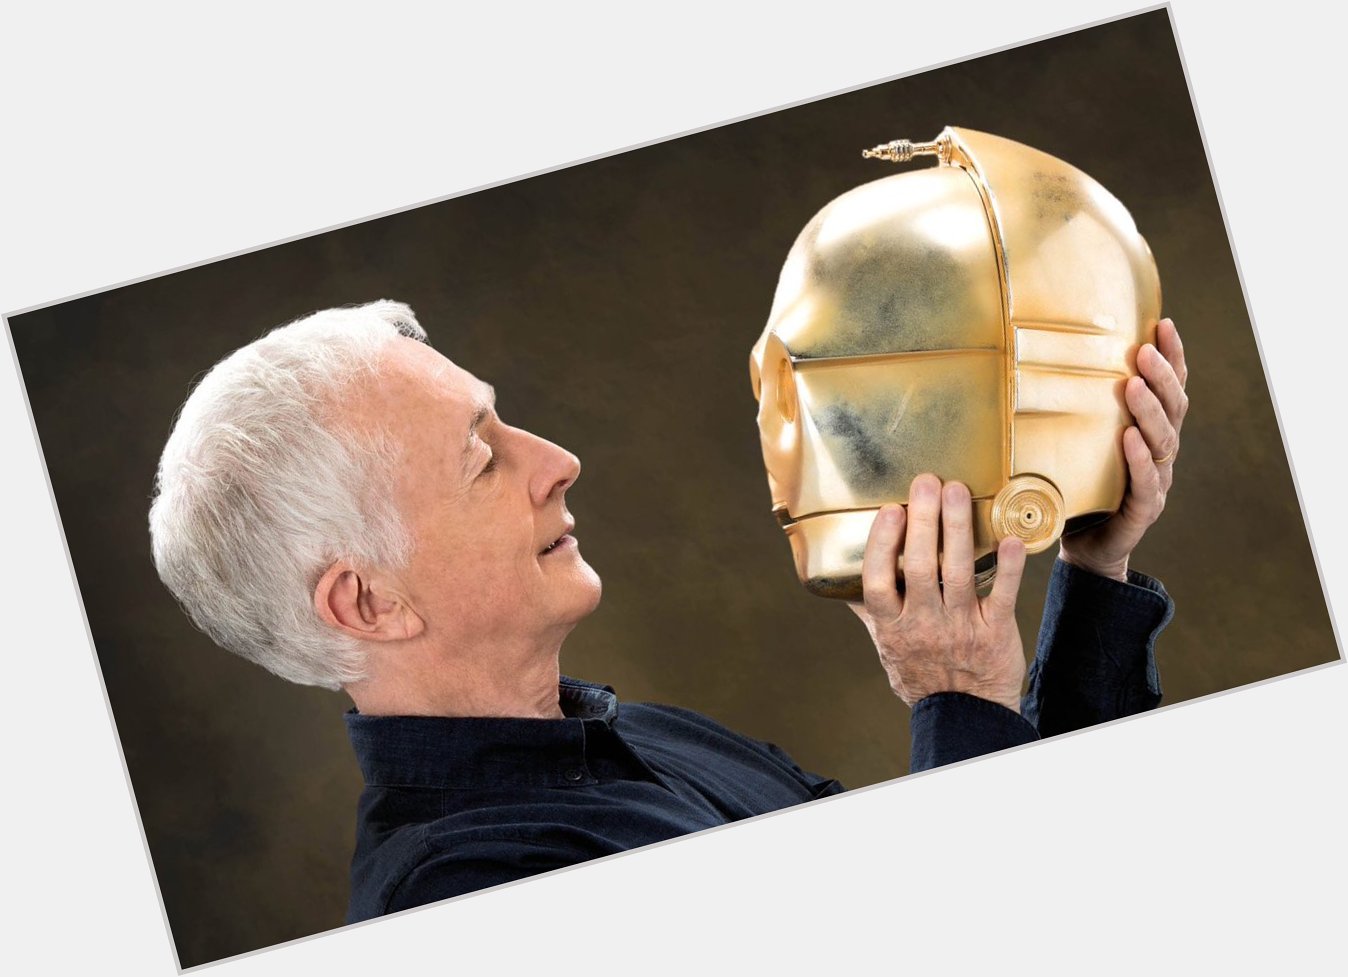 And a very happy birthday to Anthony Daniels 